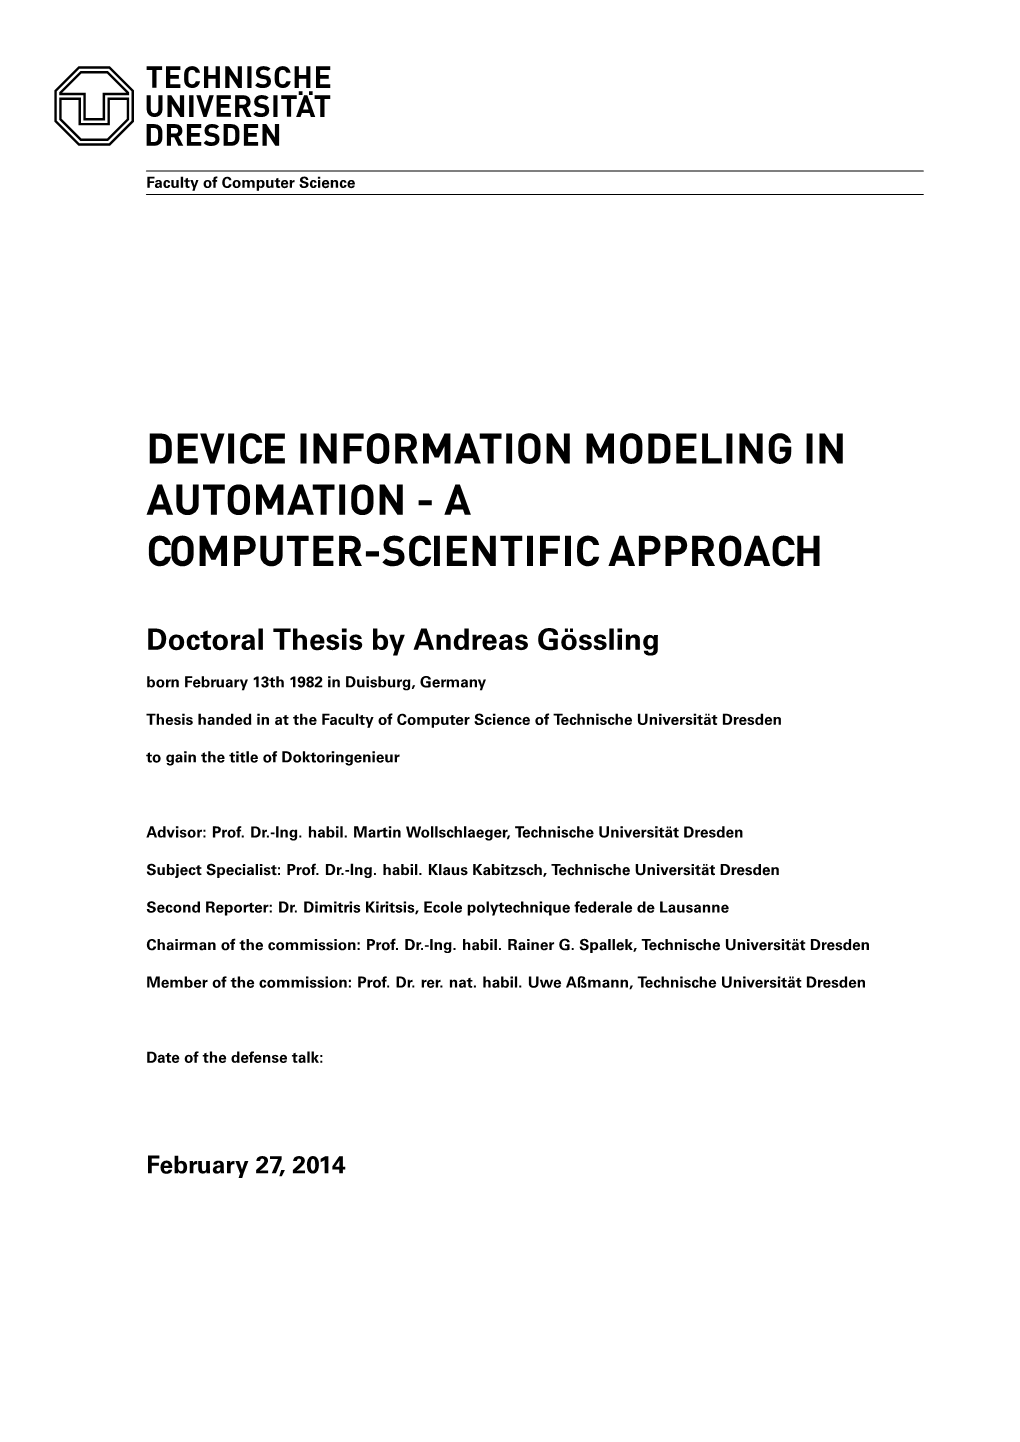 Device Information Modeling in Automation - a Computer-Scientific Approach